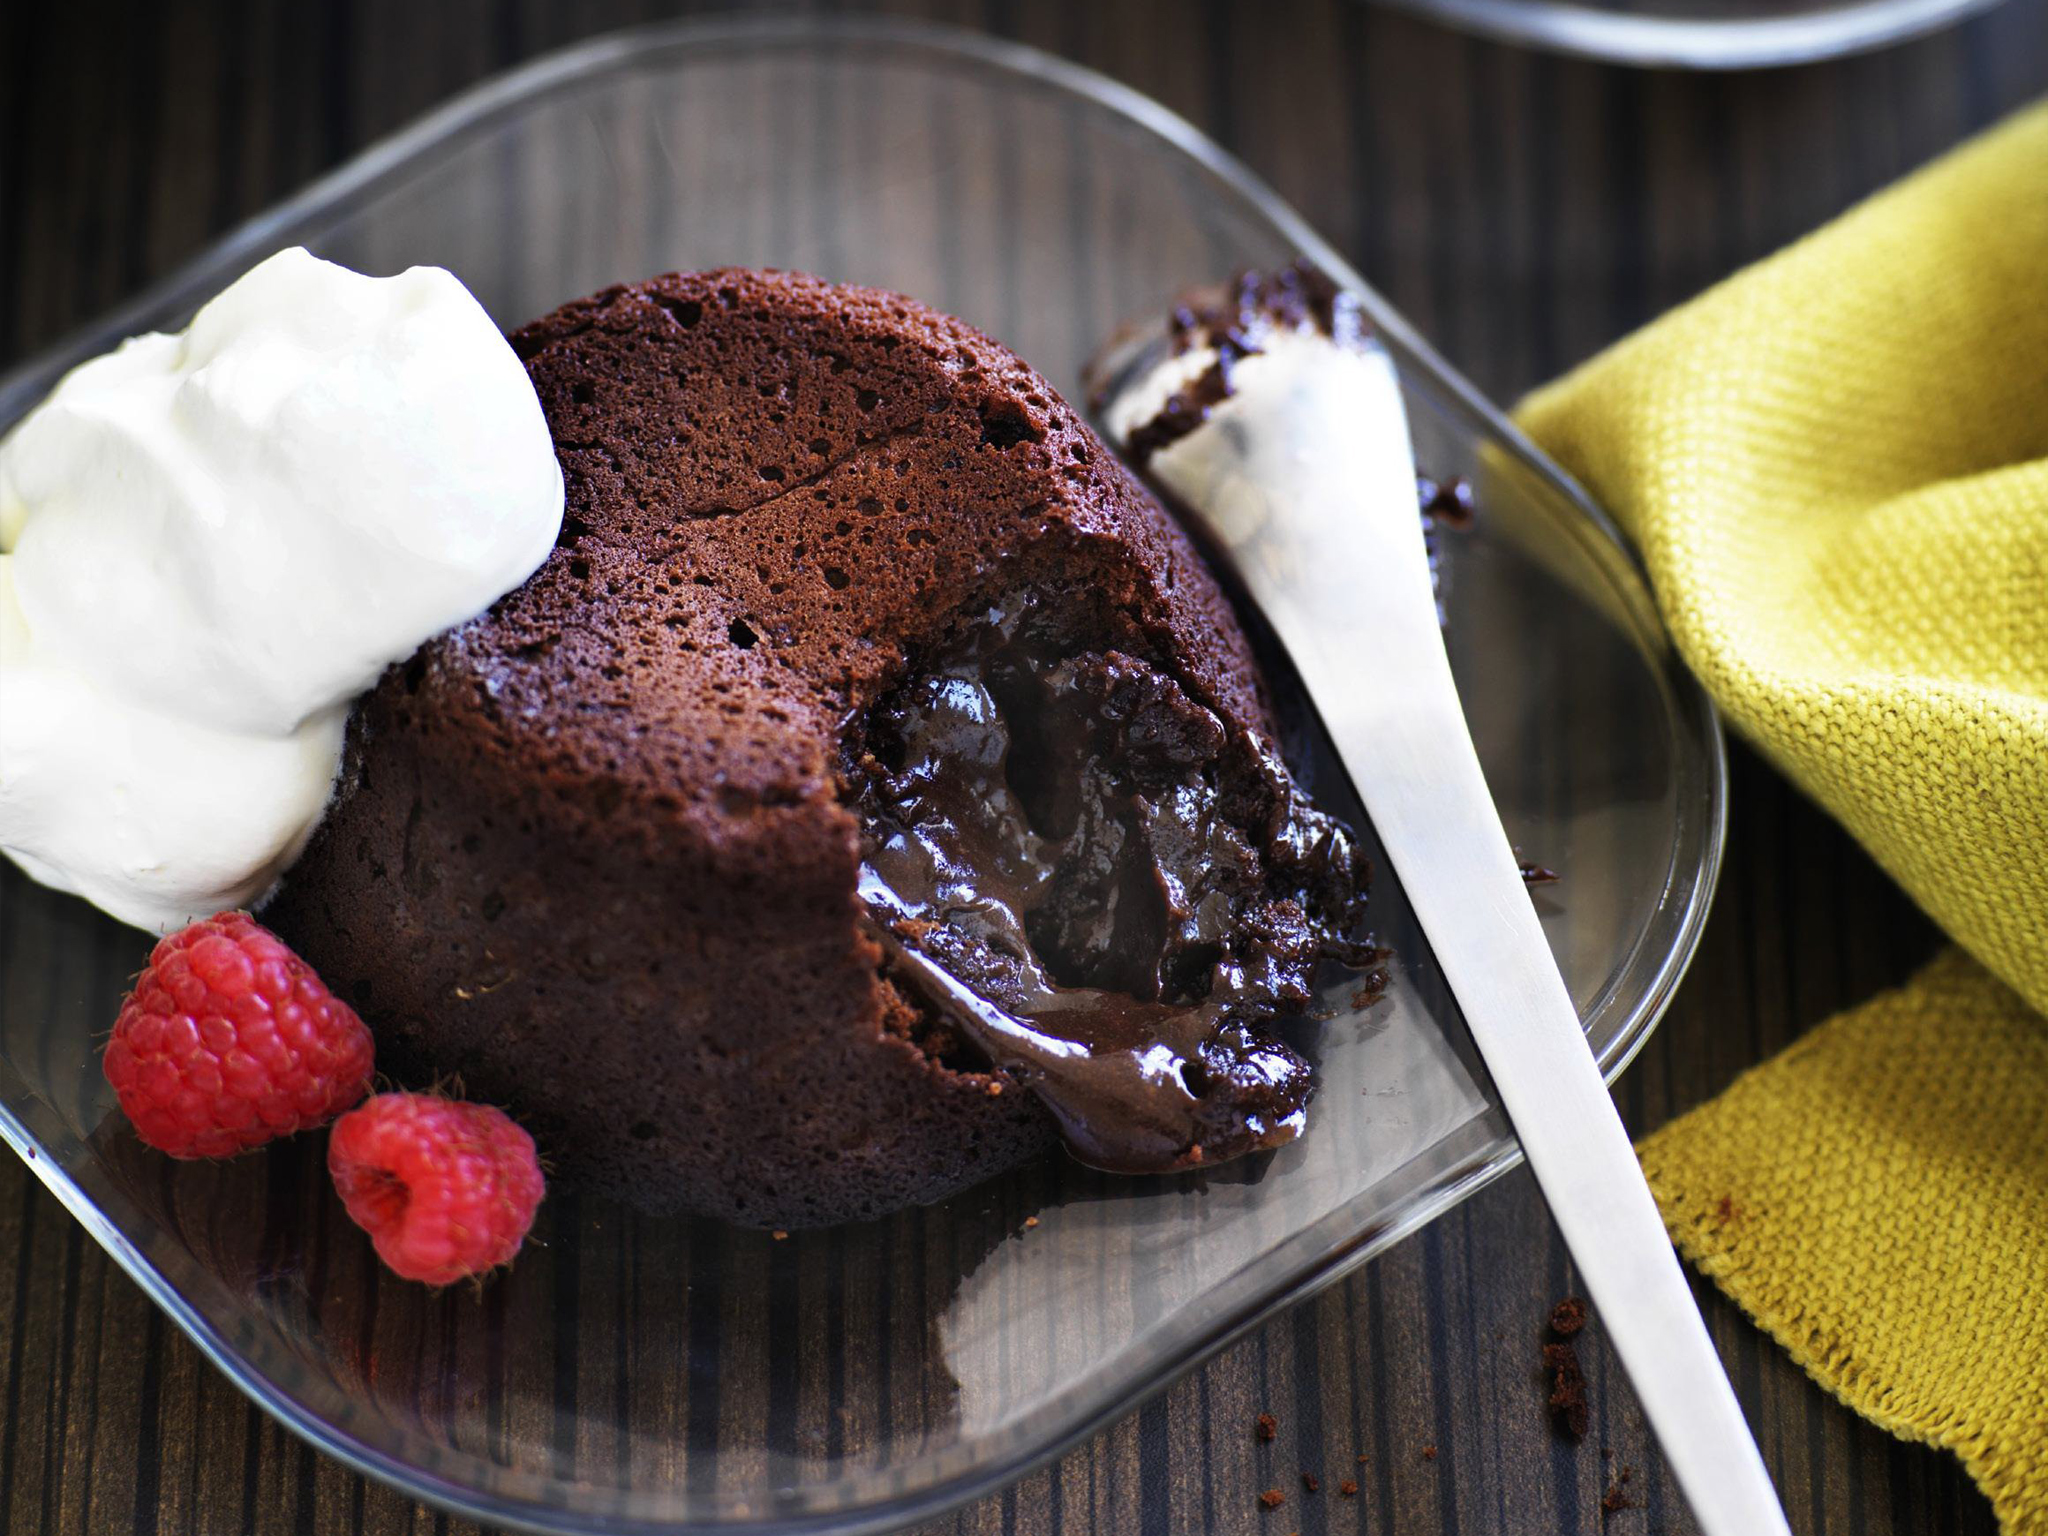 Soft-centred chocolate cakes recipe | Food To Love